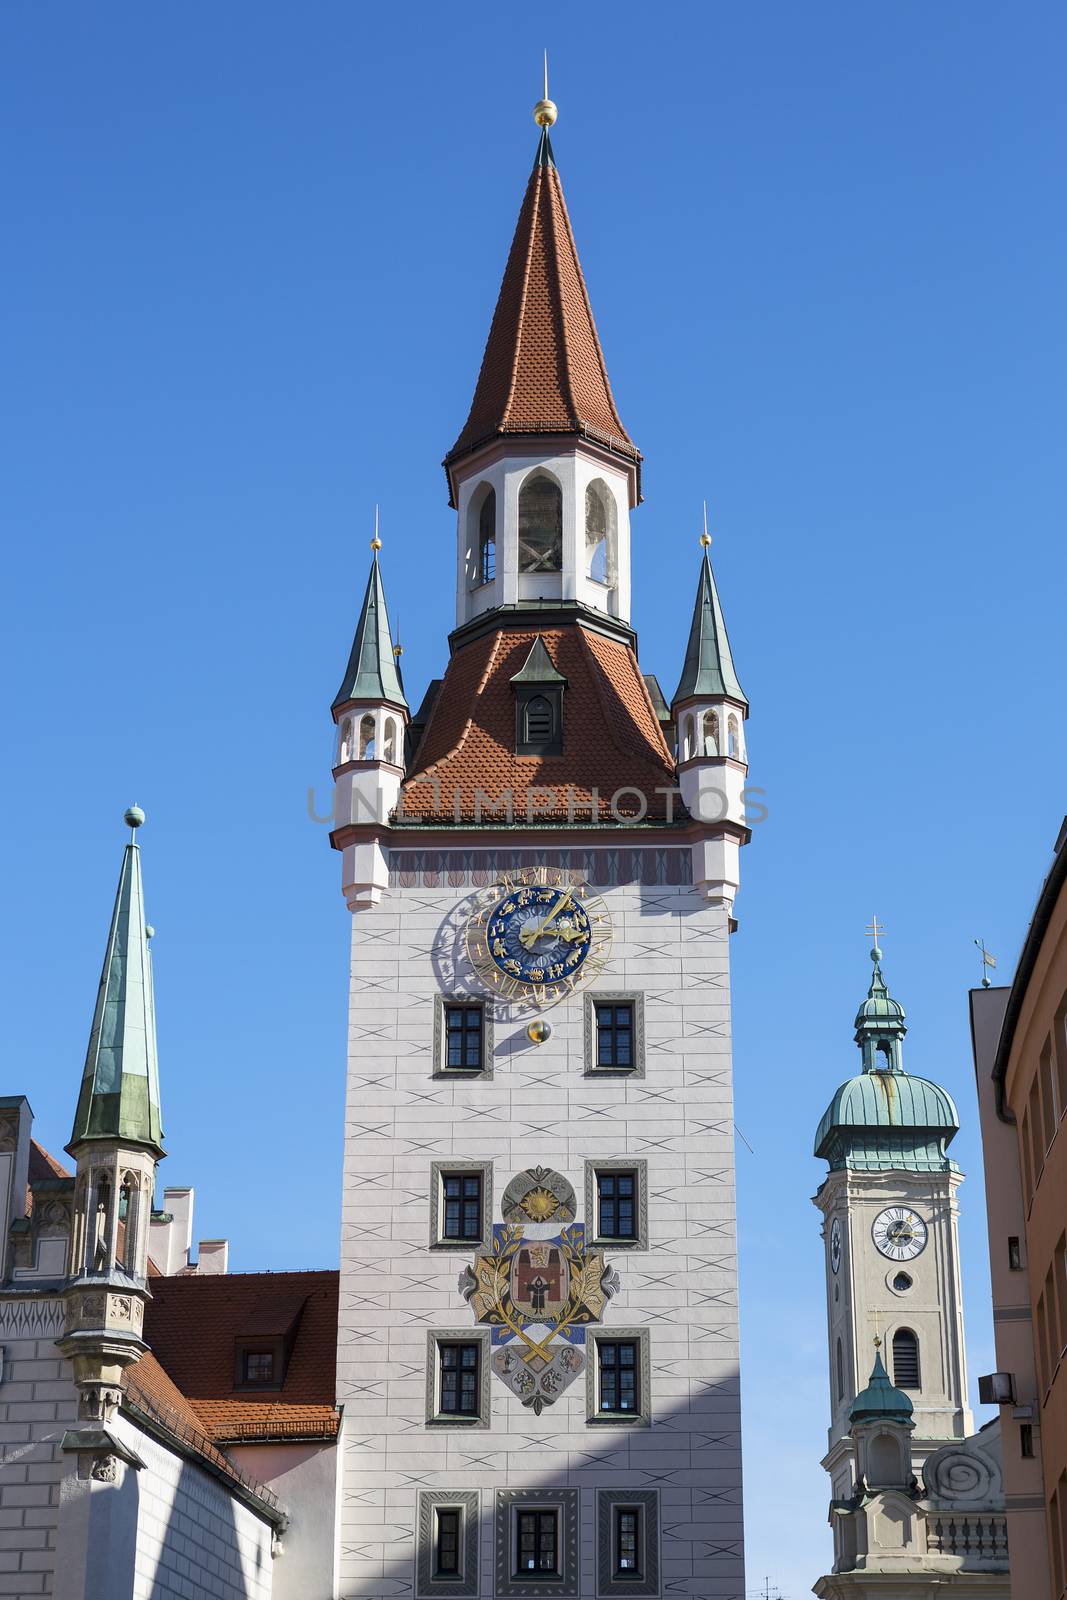 Historic bell tower in Munich, Germany